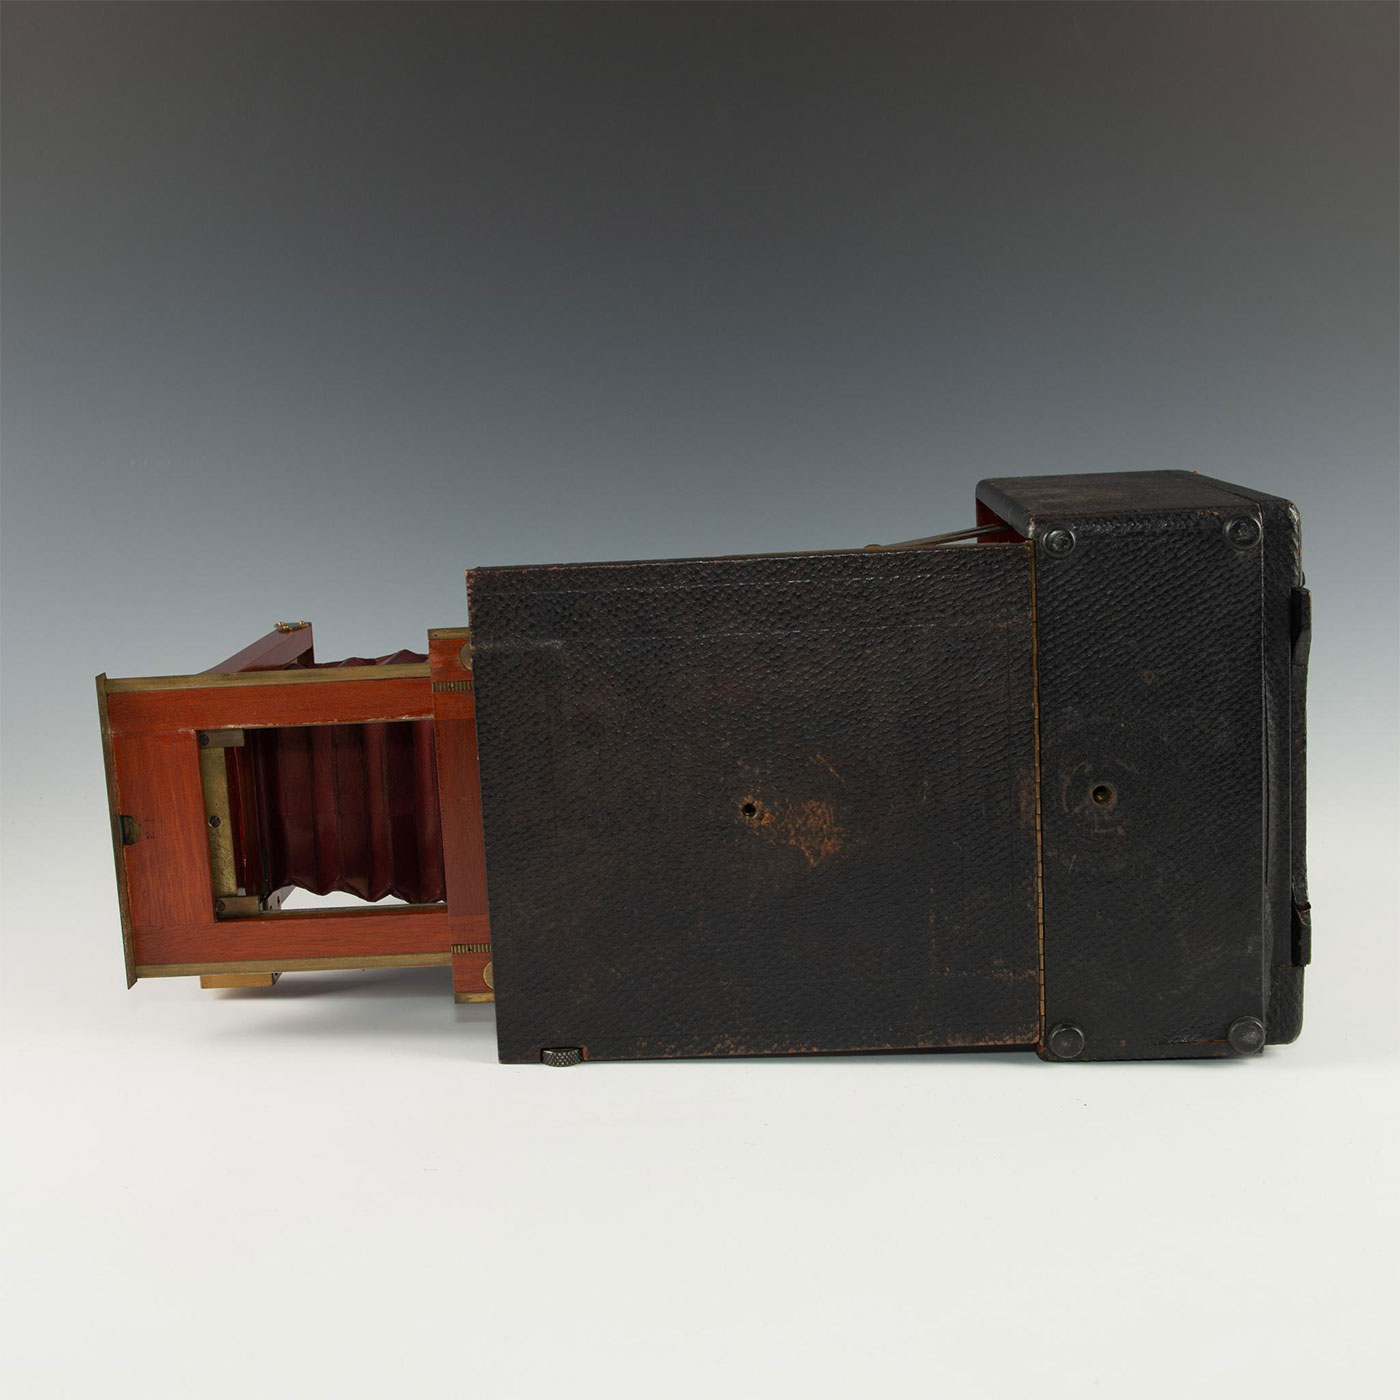 ANTIQUE EASTMAN KODAK R.B. CYCLE GRAPHIC BELLOWS CAMERA - Image 9 of 11